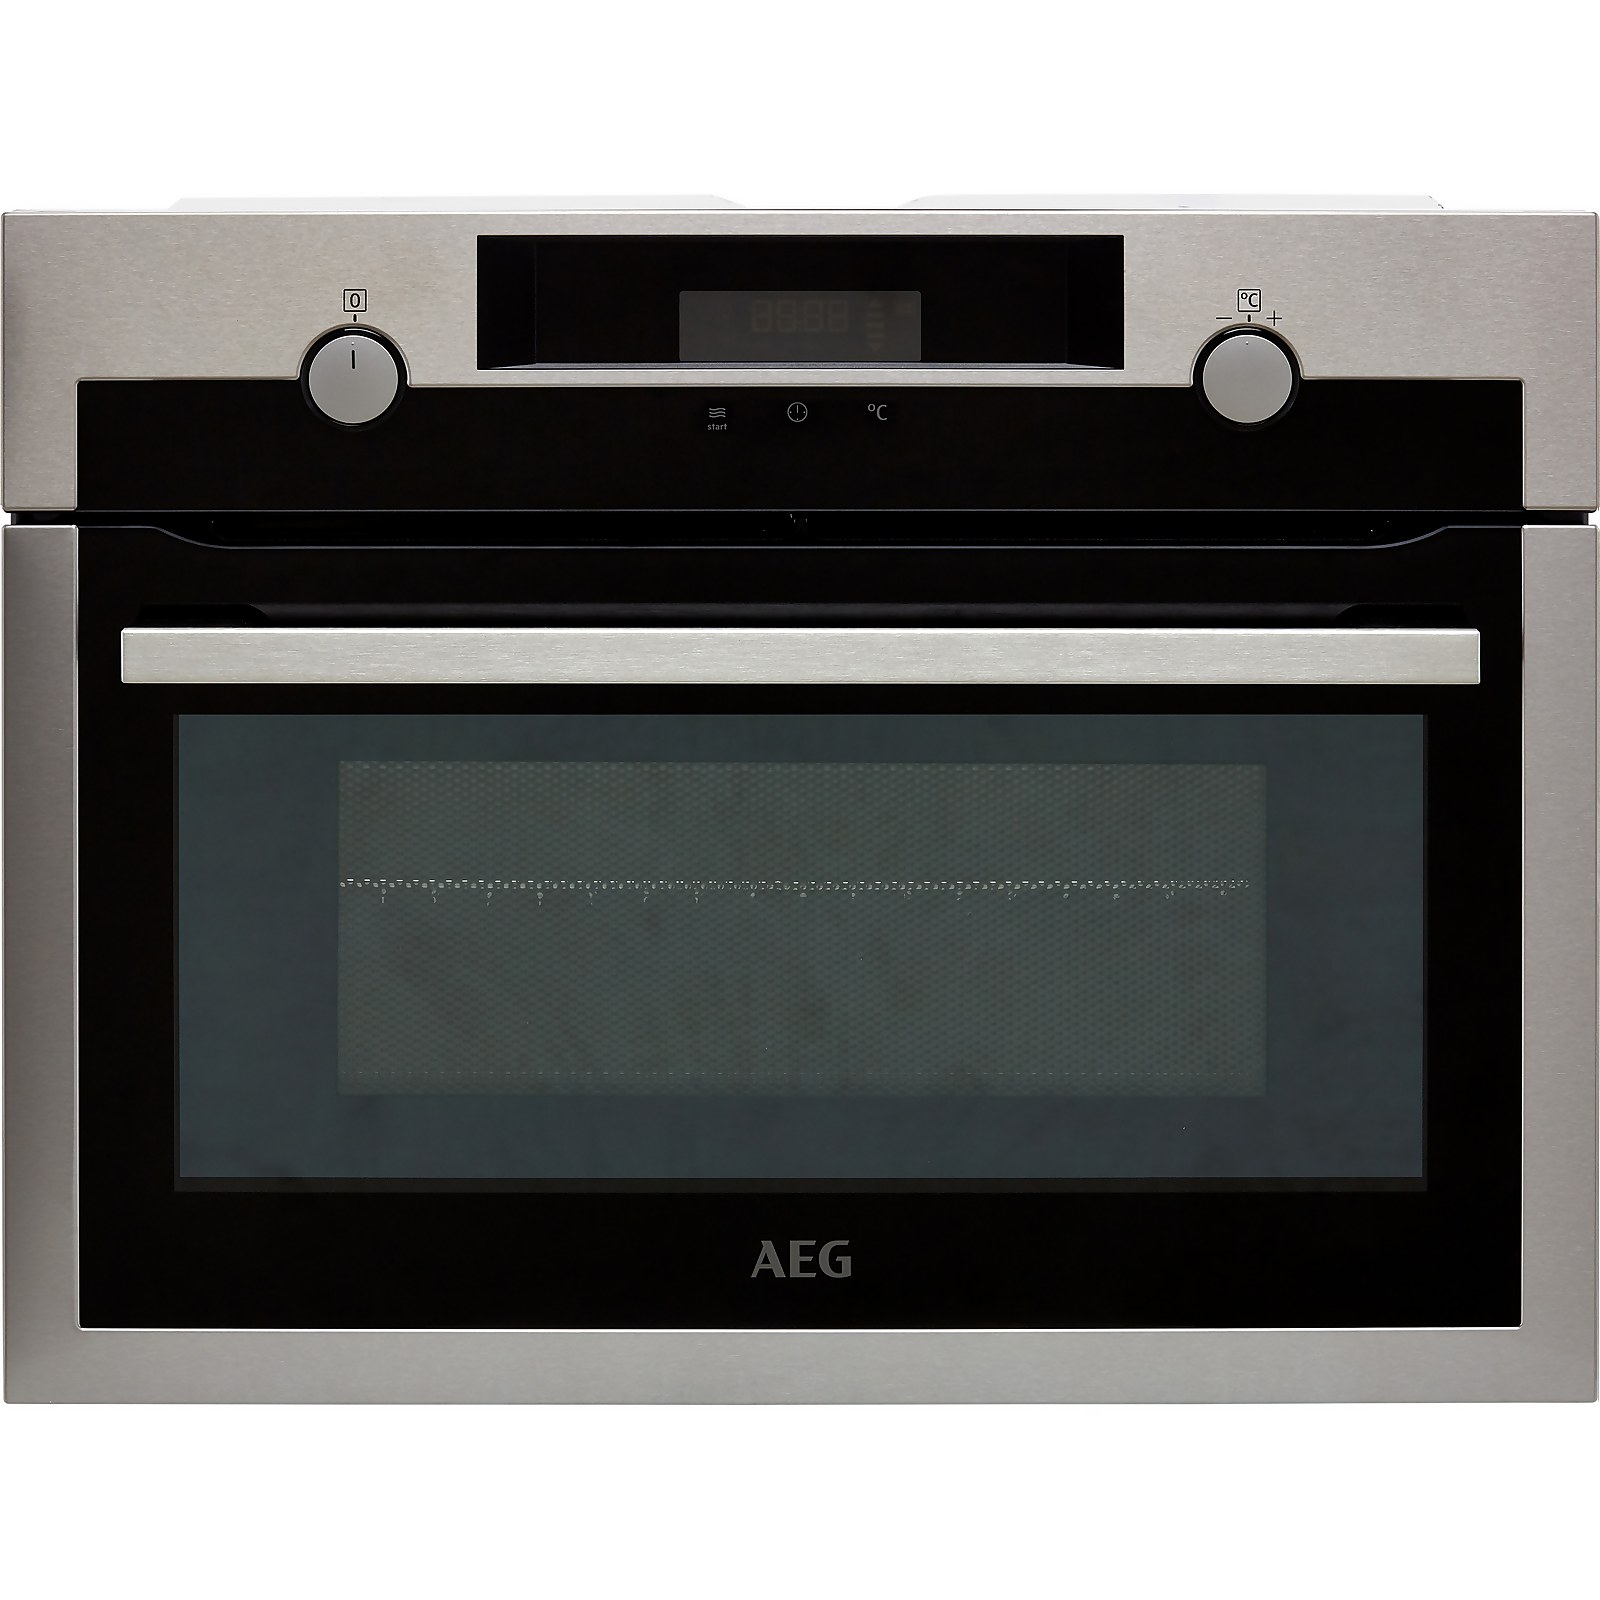 Photo of Aeg Kme565000m Built In Compact Electric Single Oven With Microwave Function - Stainless Steel